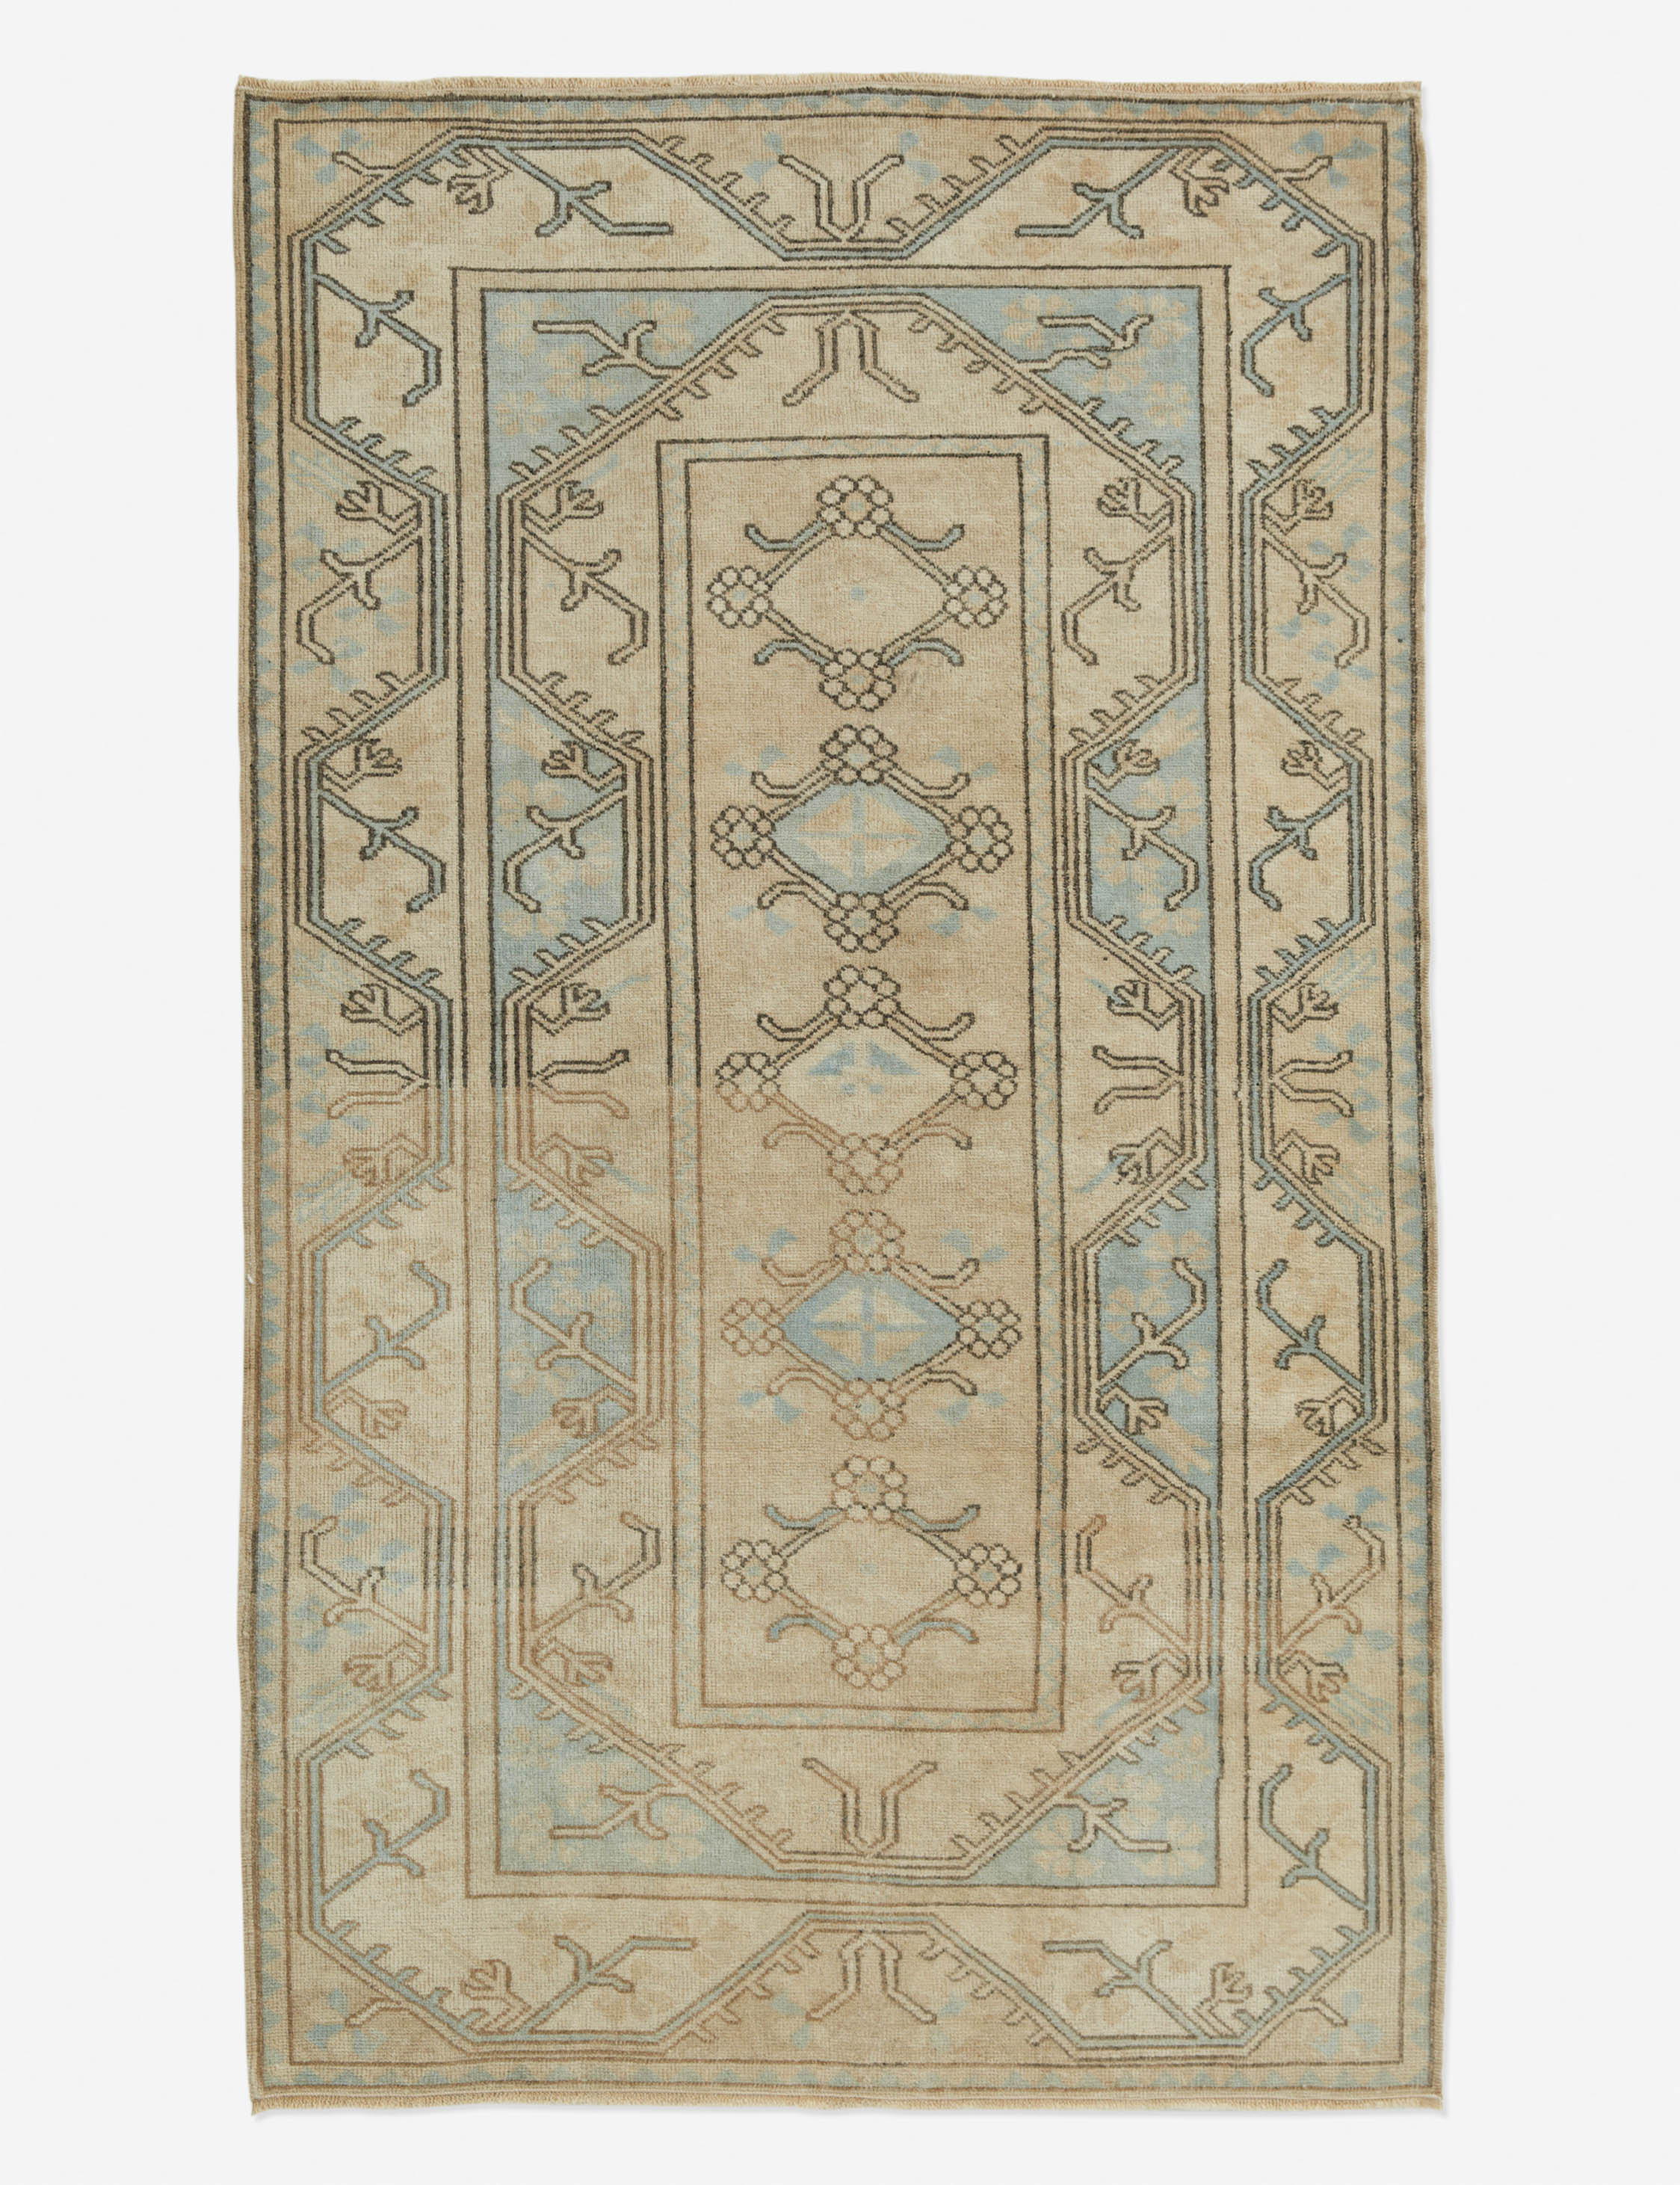 Vintage Turkish Hand-Knotted Wool Rug No. 196, 4'3